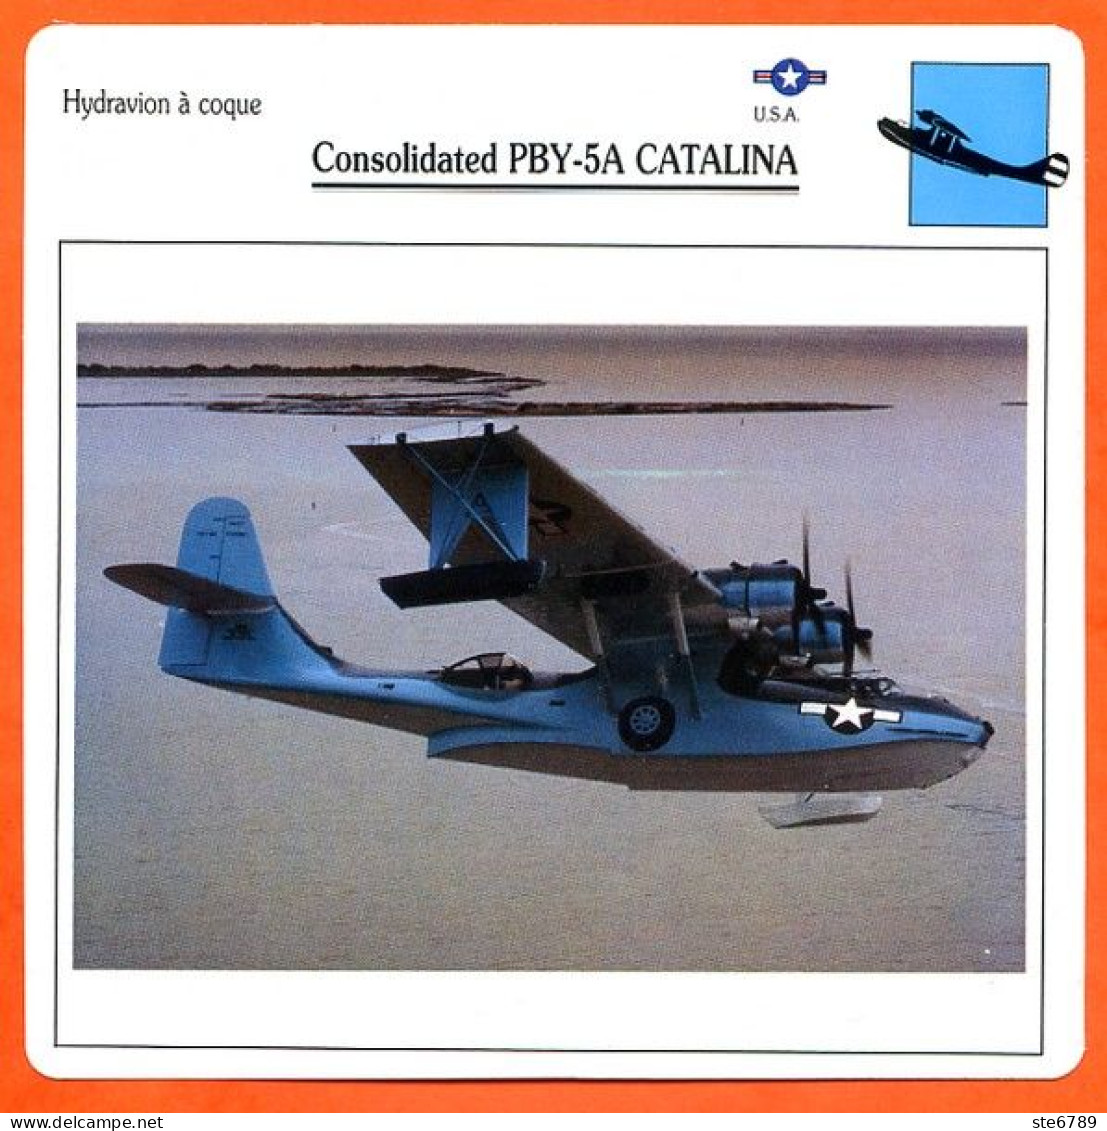 Fiche Aviation Consolidated PBY 5A CATALINA / Hydravion A Coque USA Avions - Airplanes